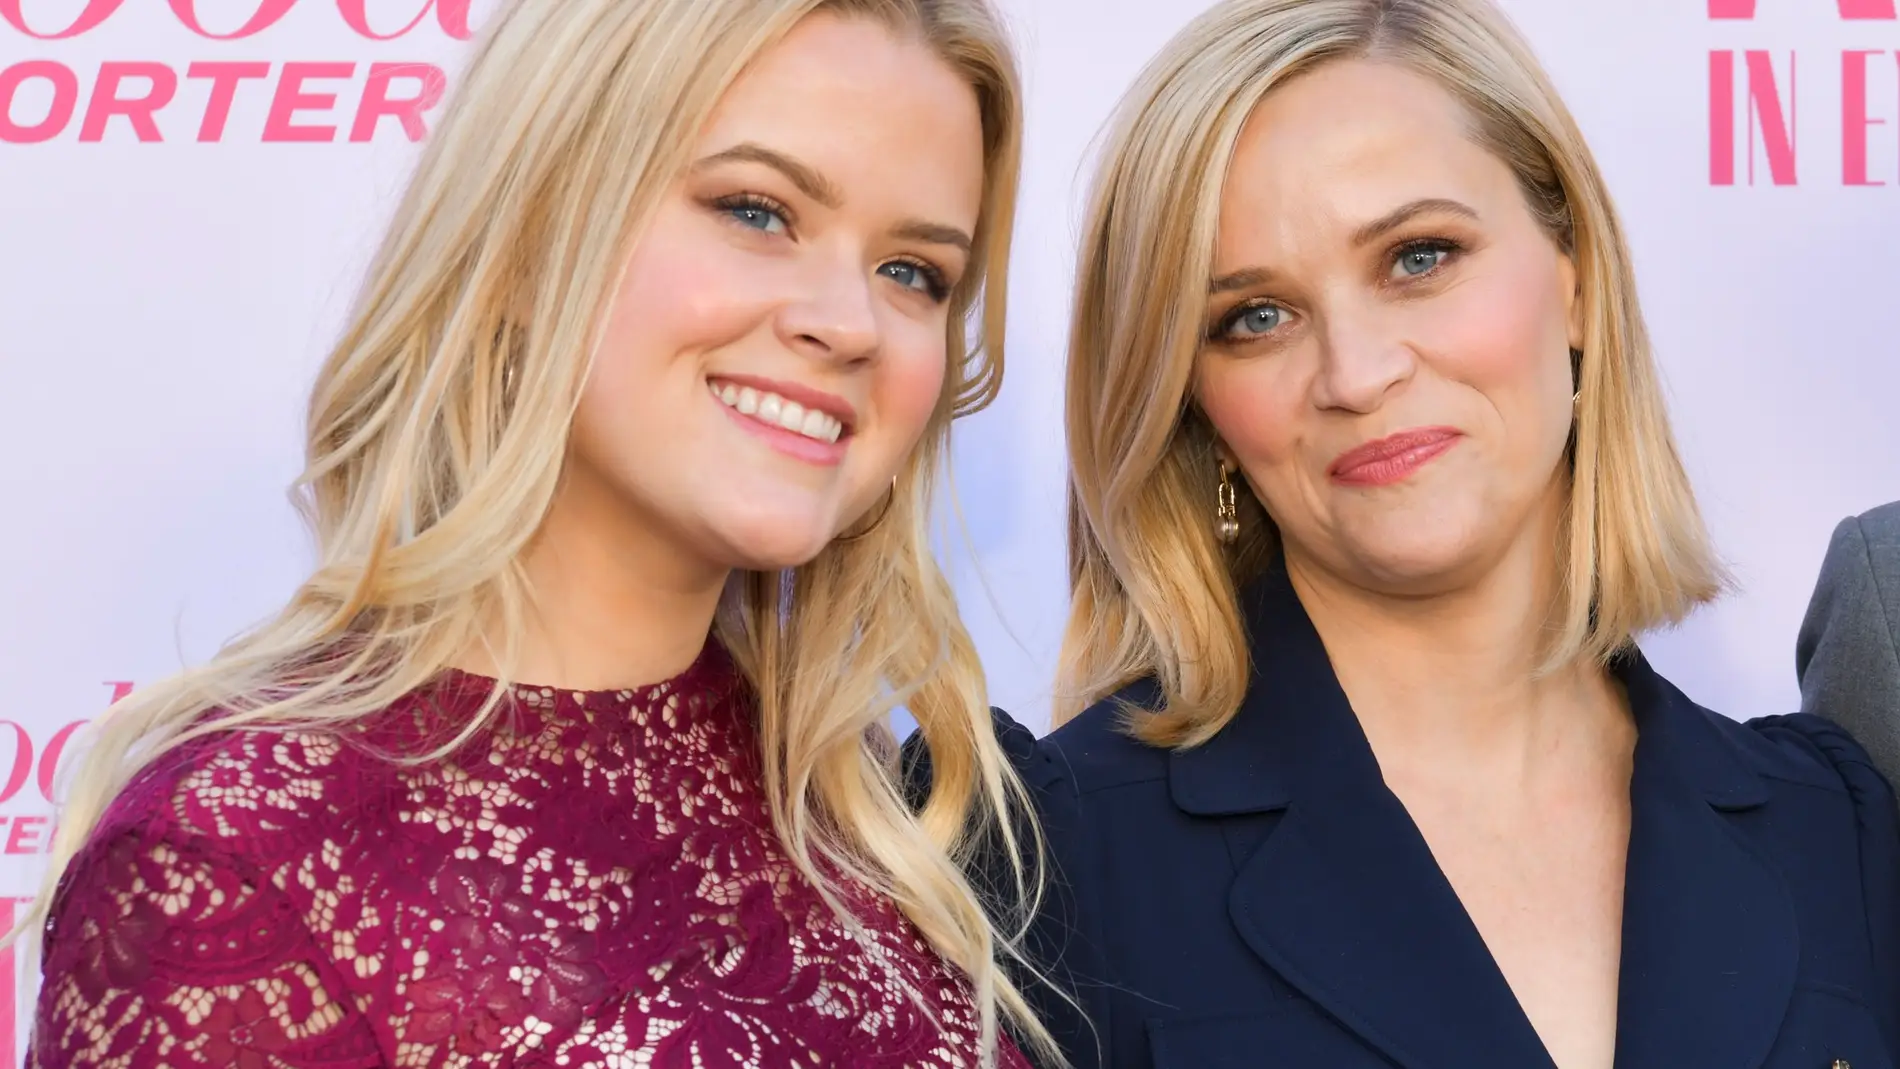 Reese Witherspoon y su hija Ava Phillippe